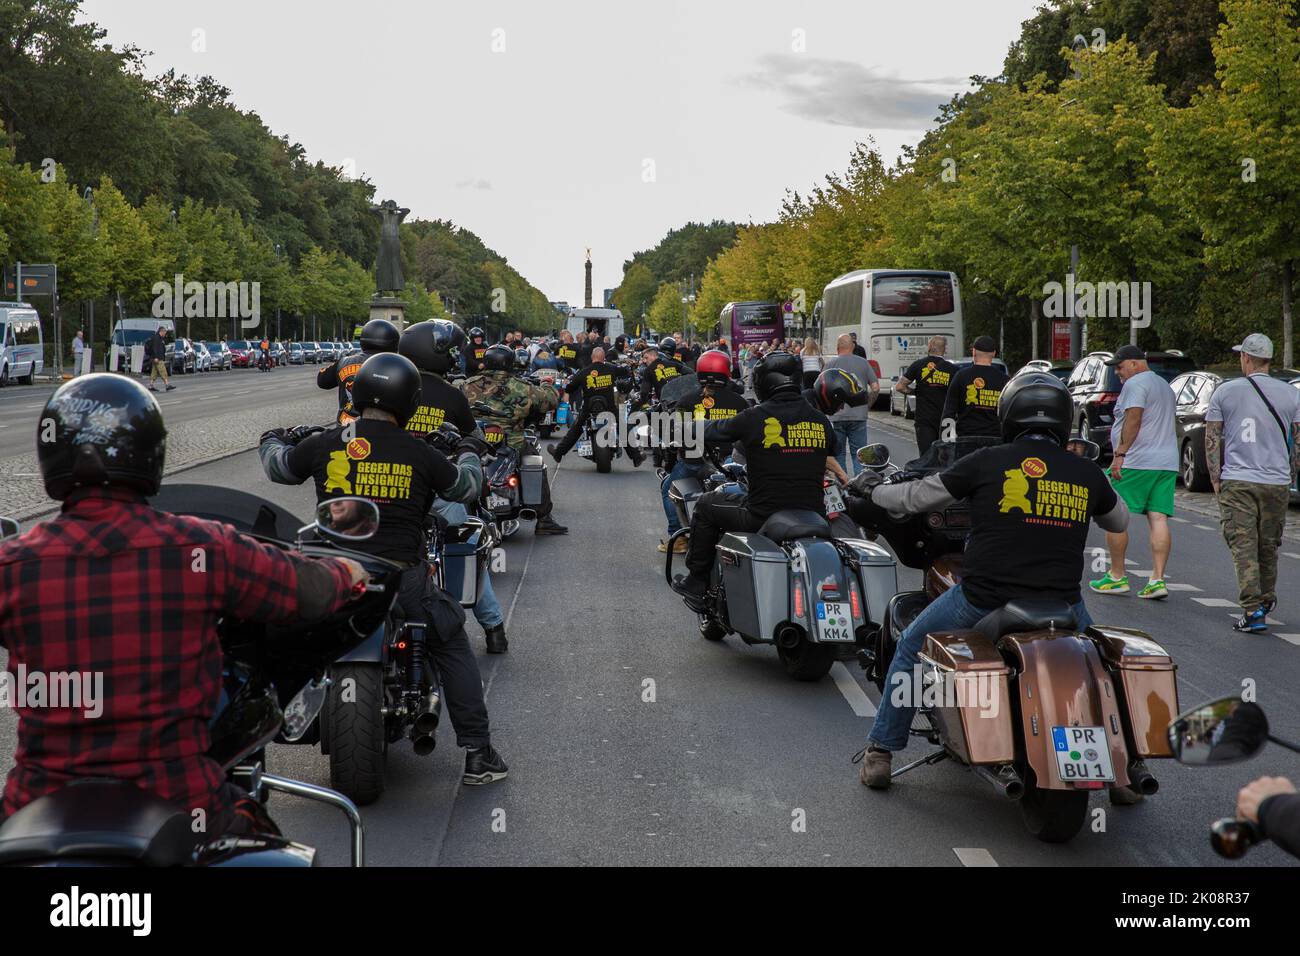 Berlin, Germany. 10th Sep, 2022. Members of Outlaw motorcycle clubs took to several streets in Berlin on September 10, 2022, to protest a ban on badges. Members of Hells Angels and other motorcycle clubs participated in the protest against this law. Under the law, which has been in effect since 2017, the Hells Angels are no longer allowed to display club insignia such as the winged skull in public. Many clubs tried to file a lawsuit against this decision in court. However, the Federal Constitutional Court rejected this at the time. Among others, the ban affects the Hells Angels MC and its Stock Photo